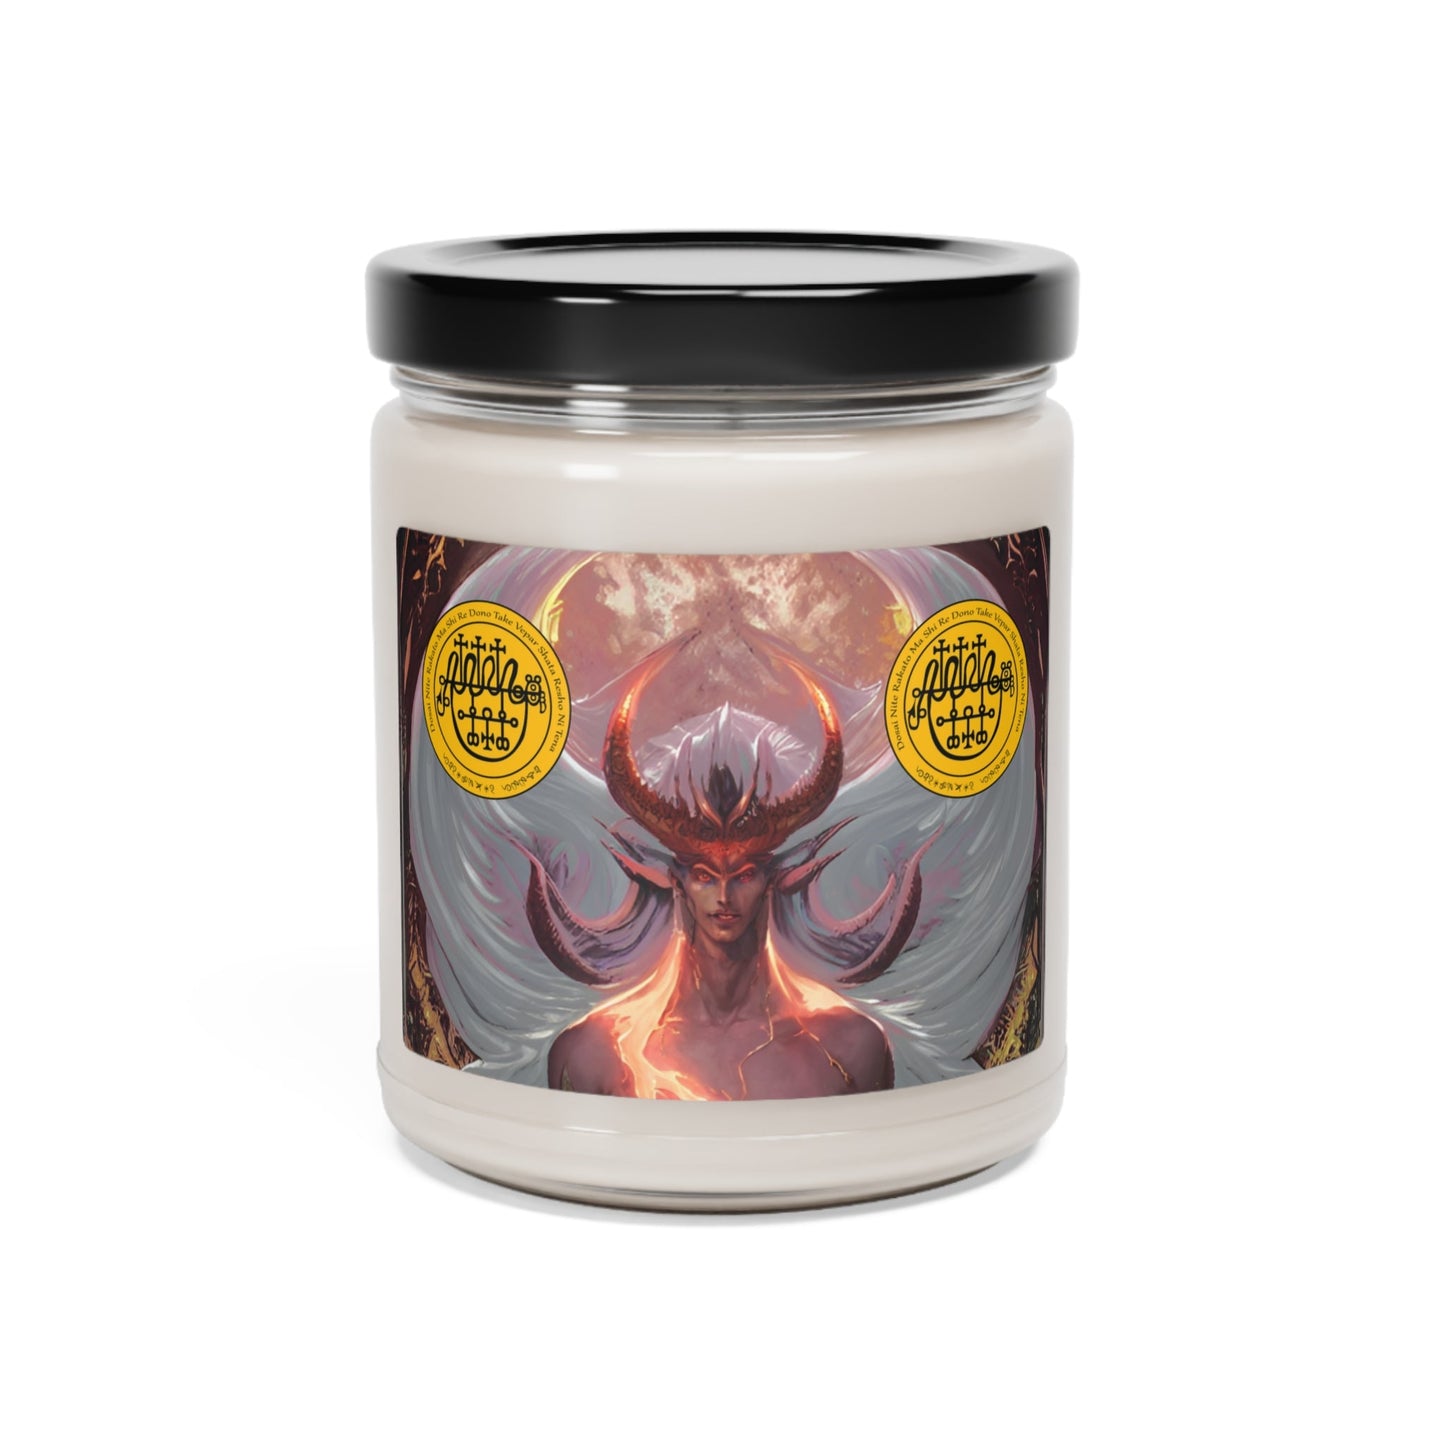 Demon-Vepar-Altar-Scented-Soy-Candle-for-offerings-rituals-initiations-o-praying-and-medtation-11